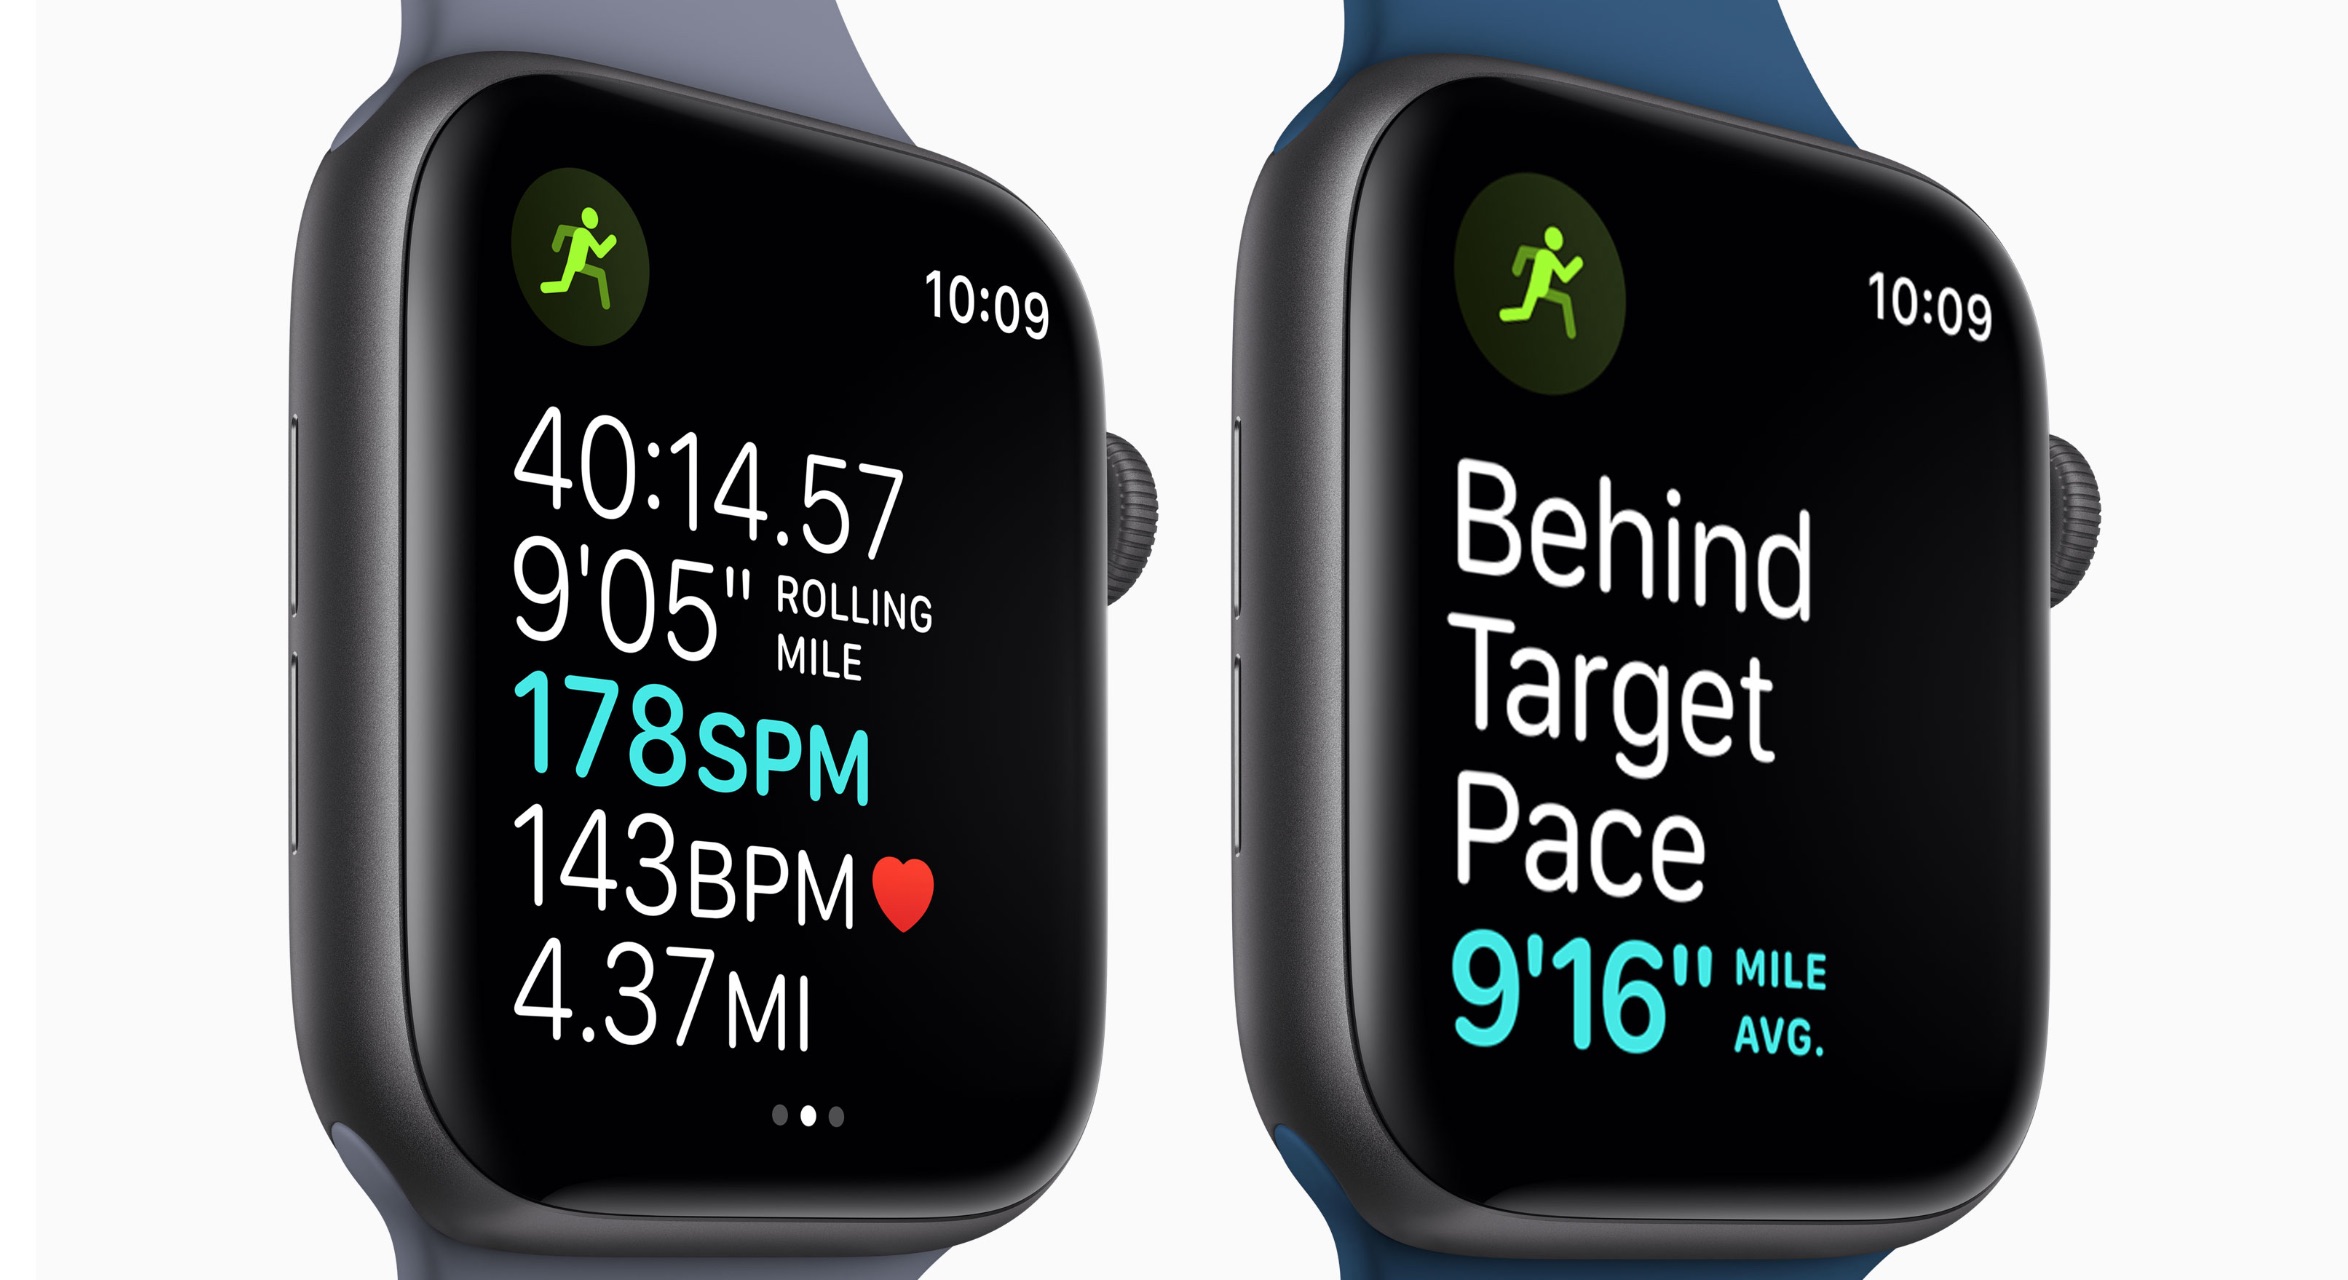 27 Value What activity burns the most calories on apple watch Workout at Gym